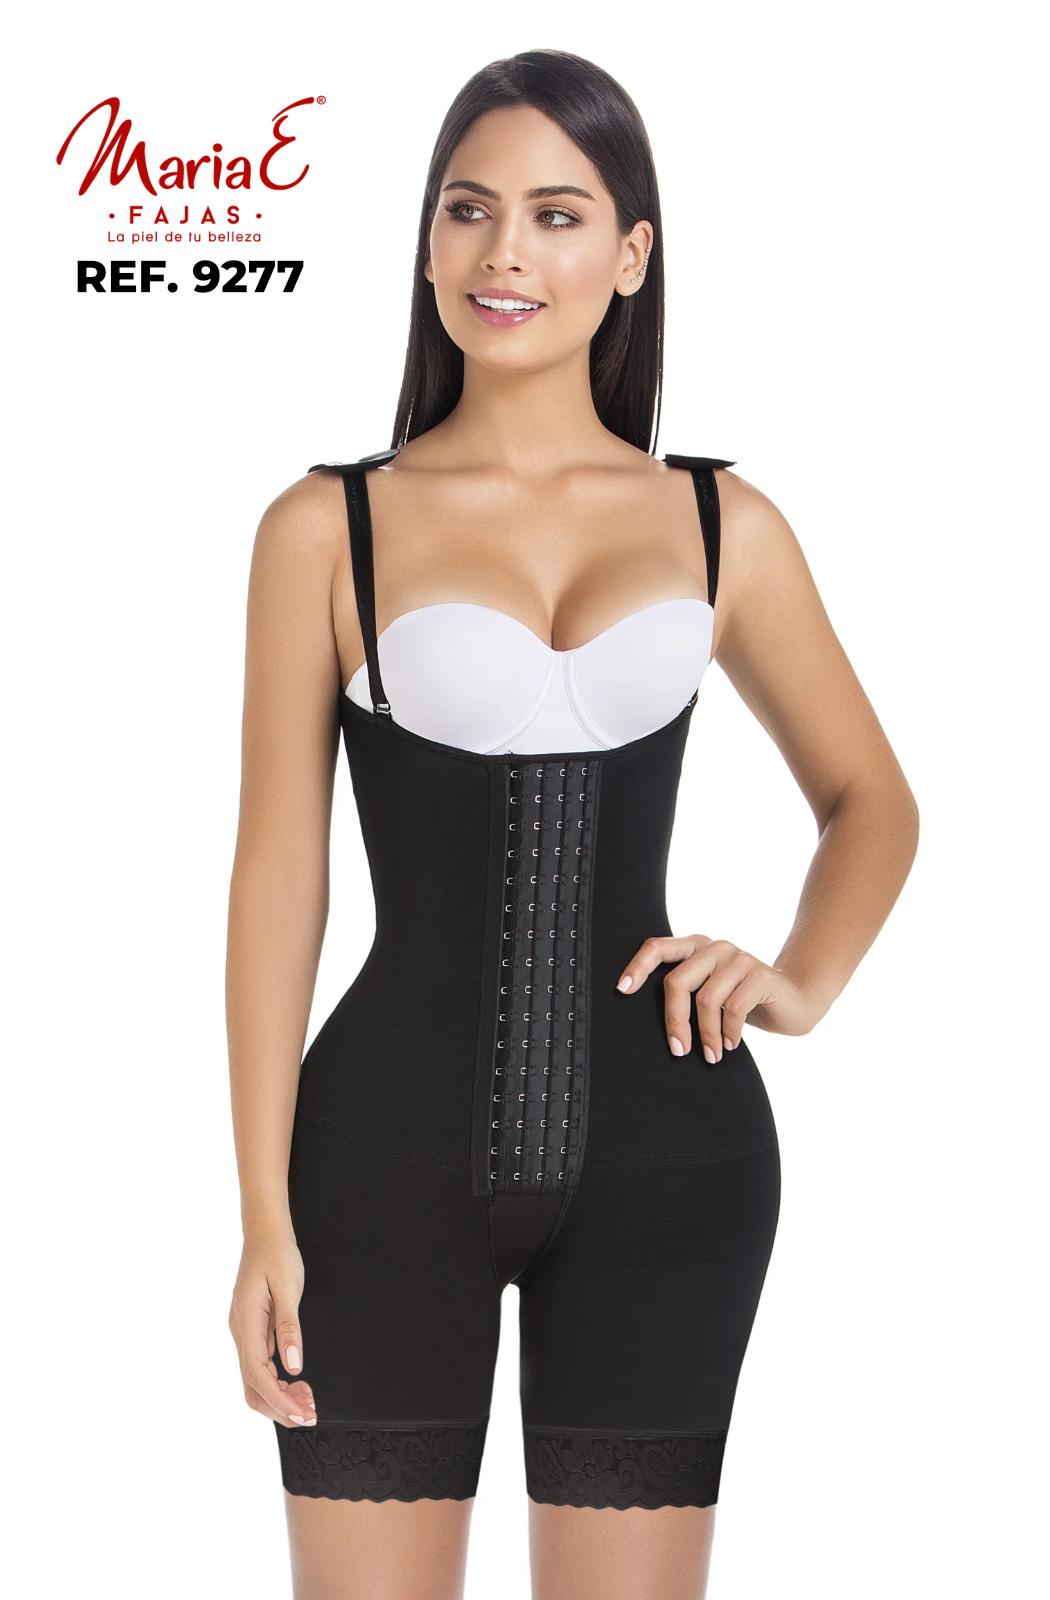 Wide hip and small waist girdle